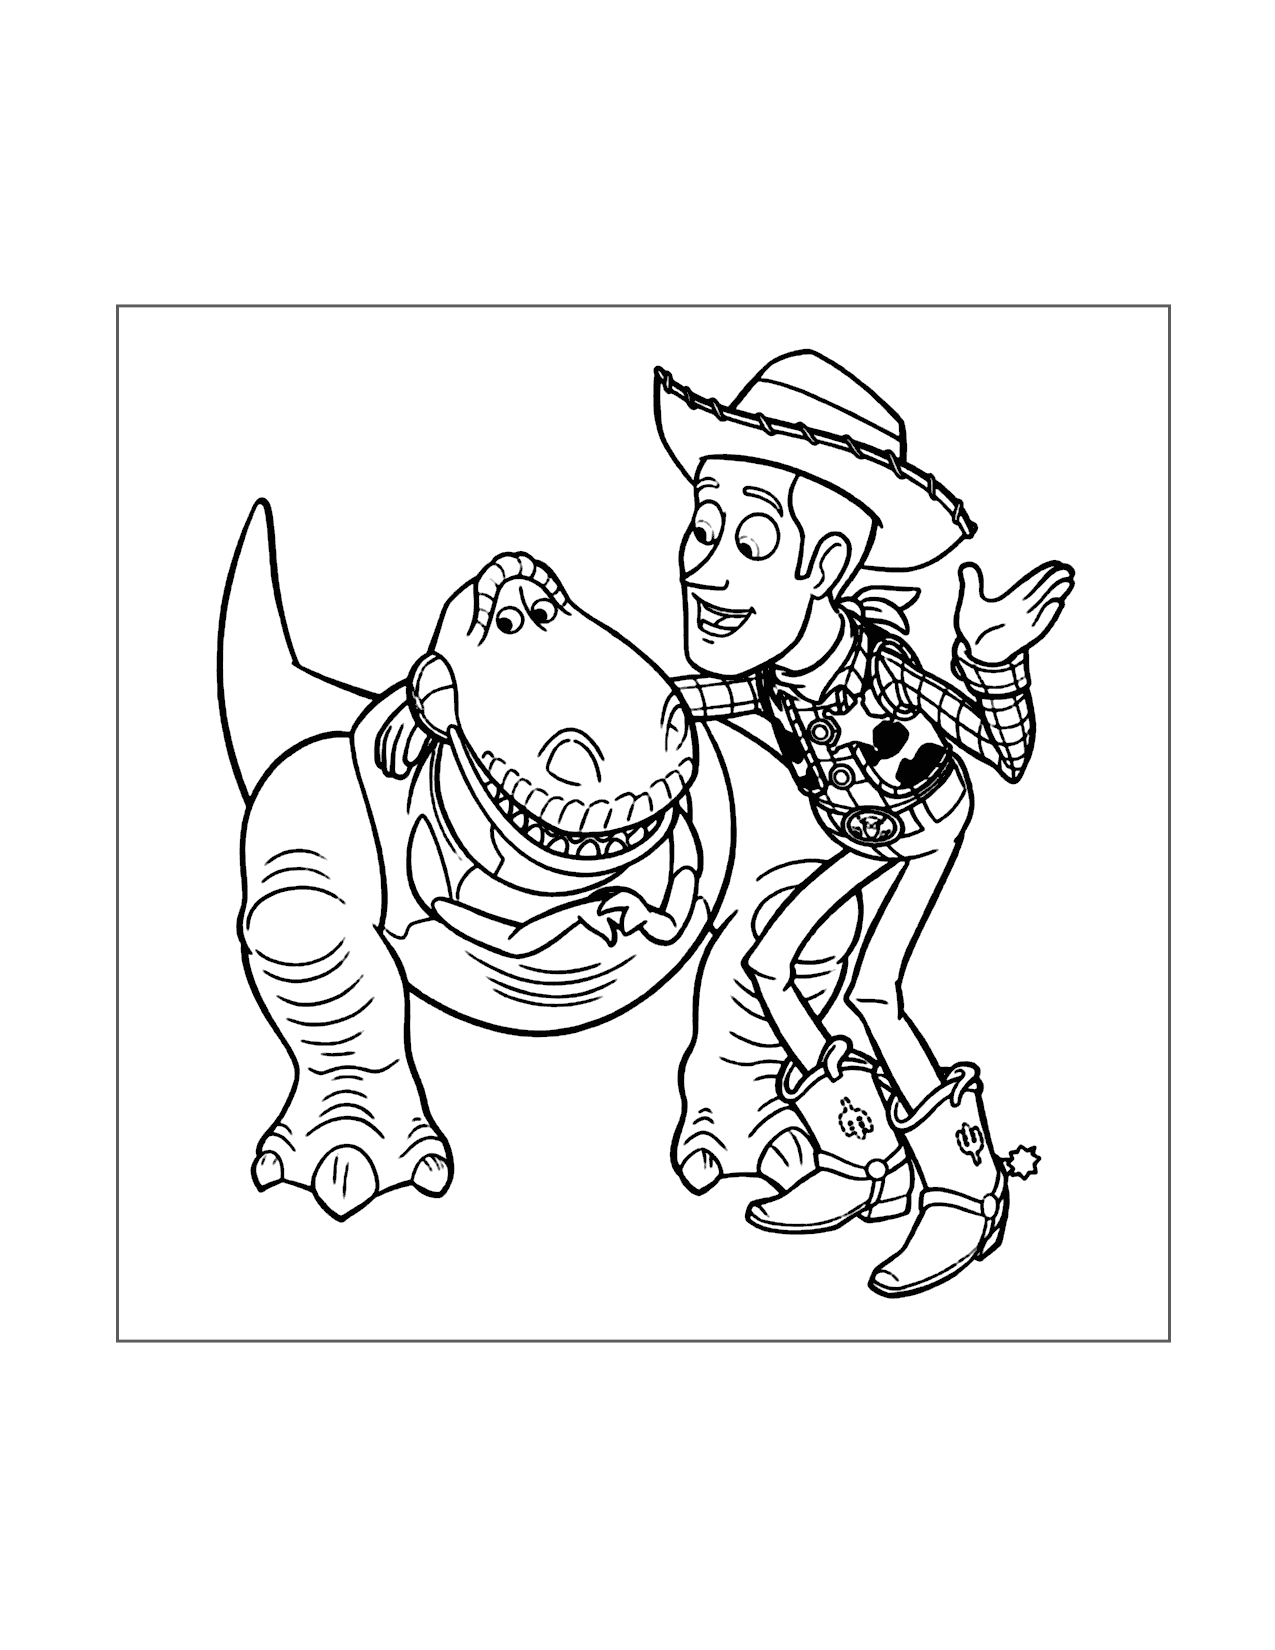 Rex And Woody Coloring Page